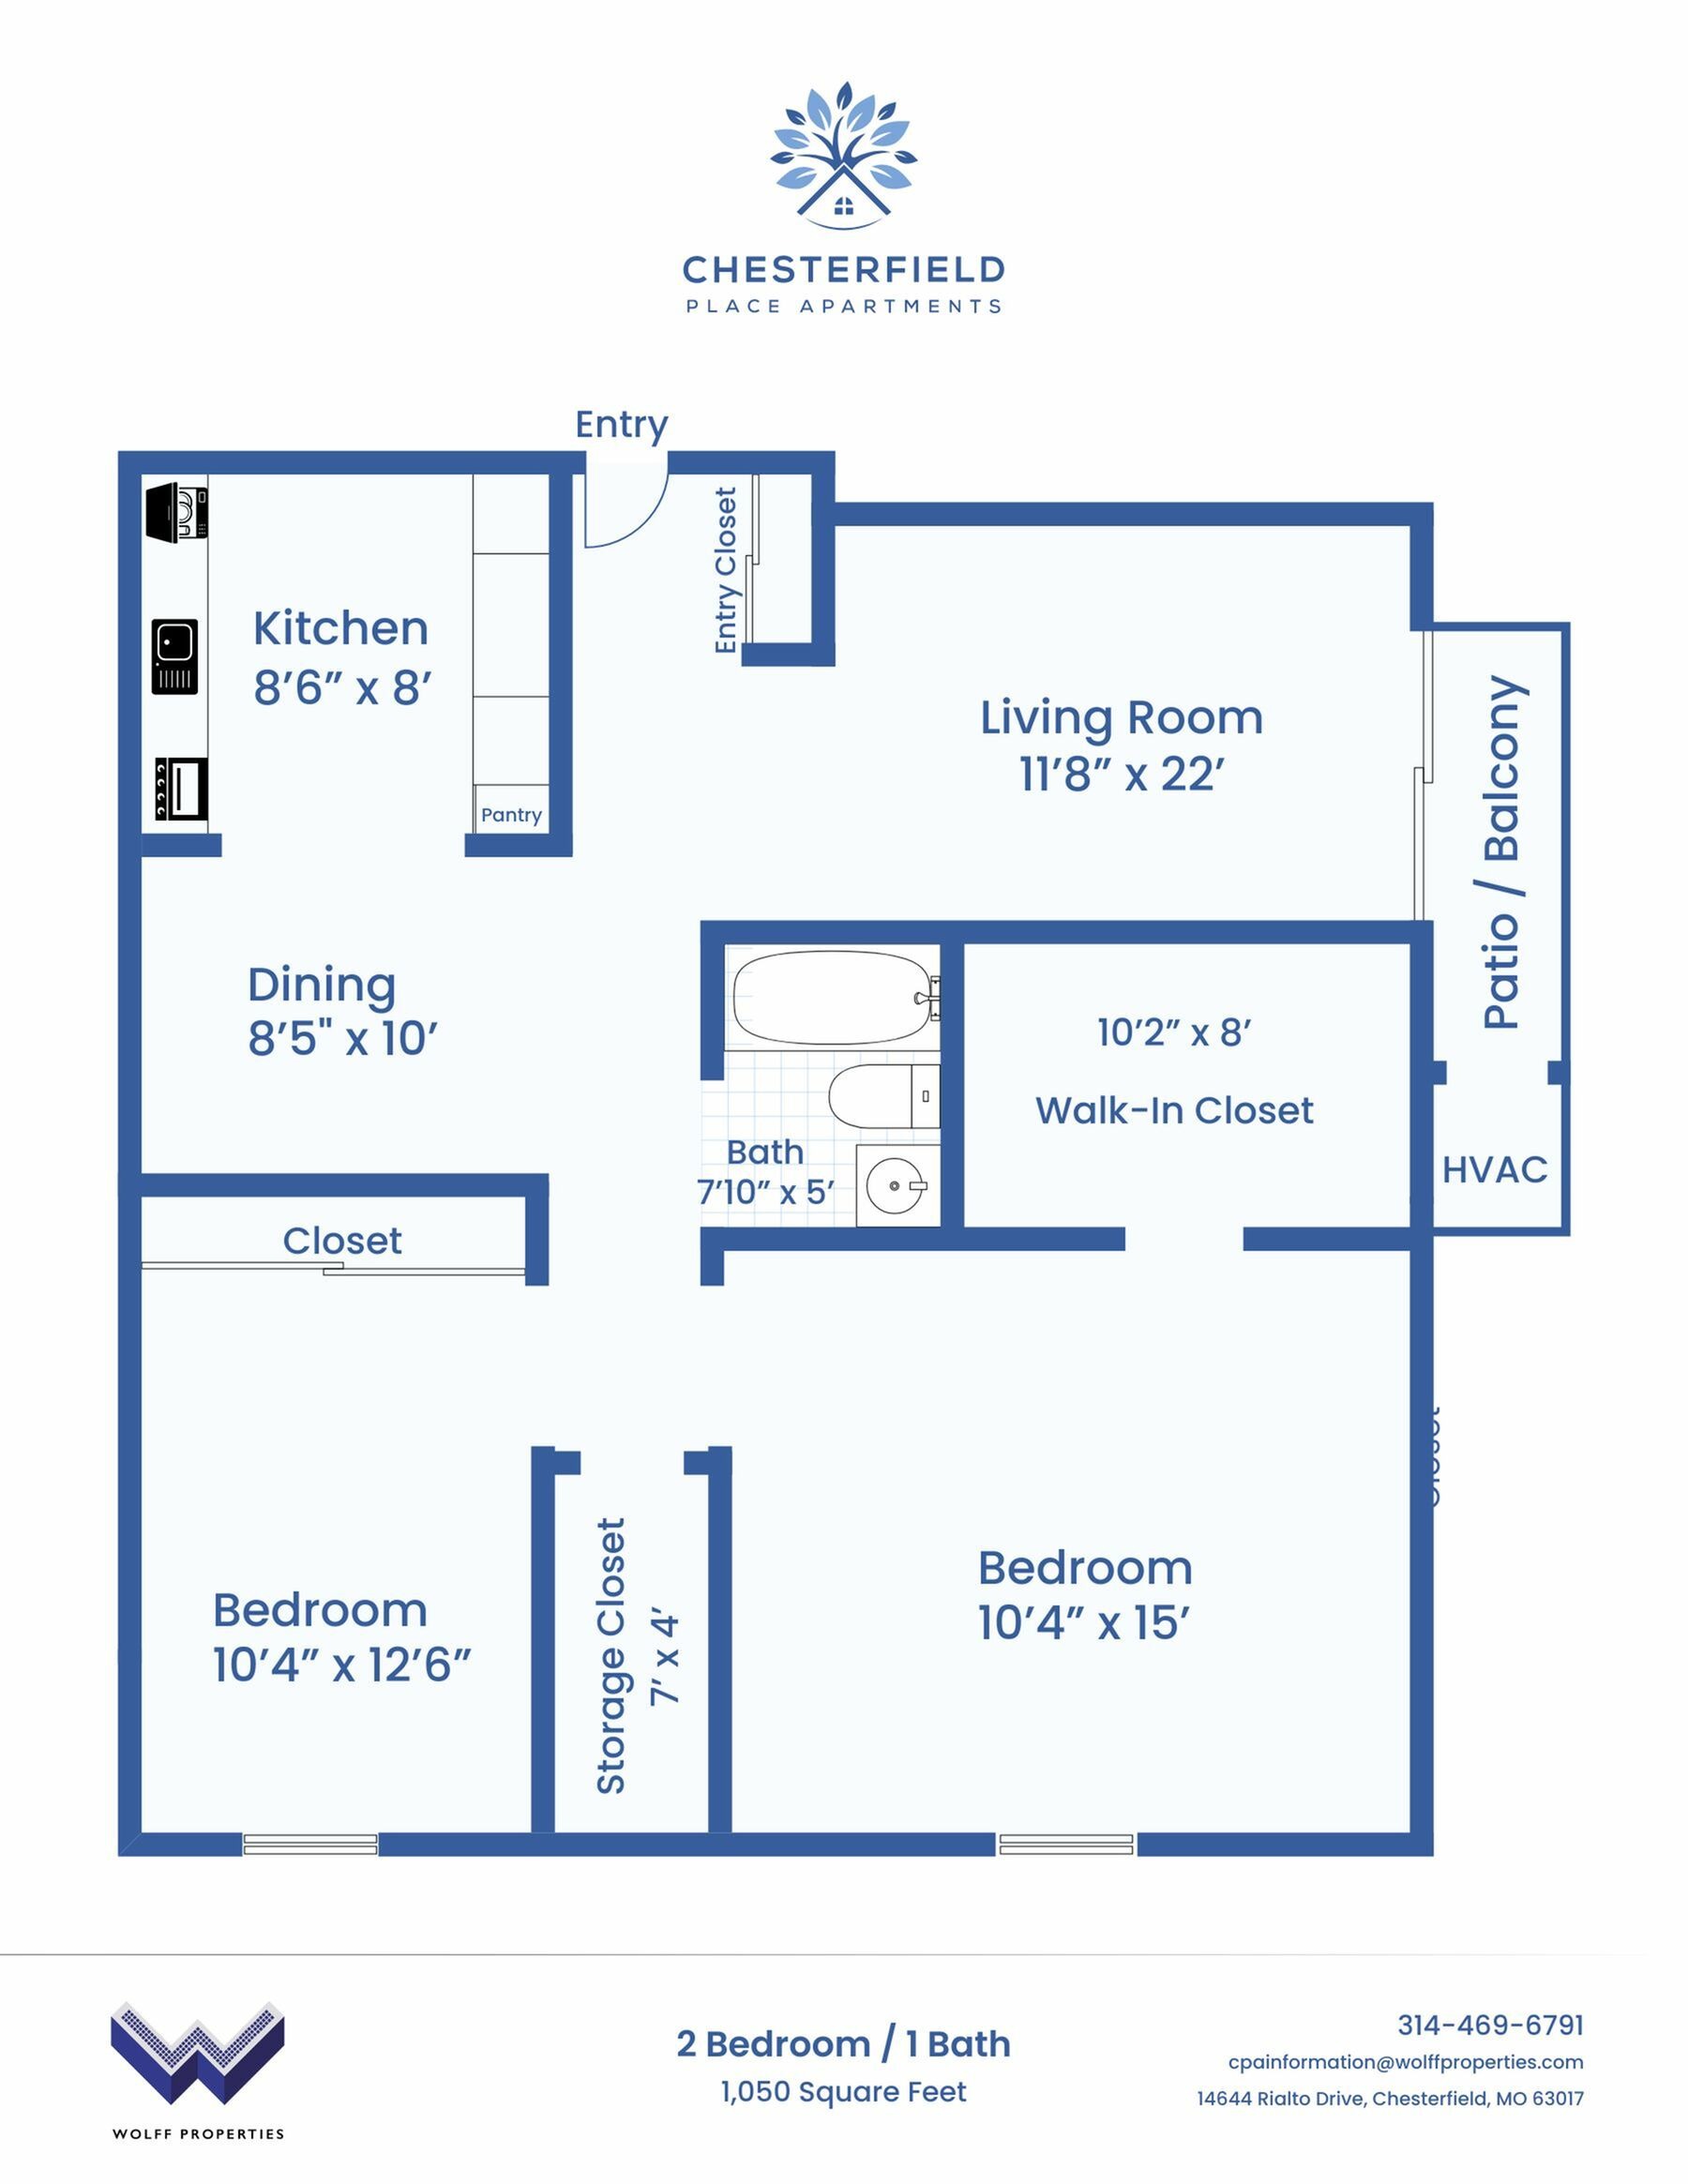 Chesterfield Place Apartments Two Bedroom Floorplan